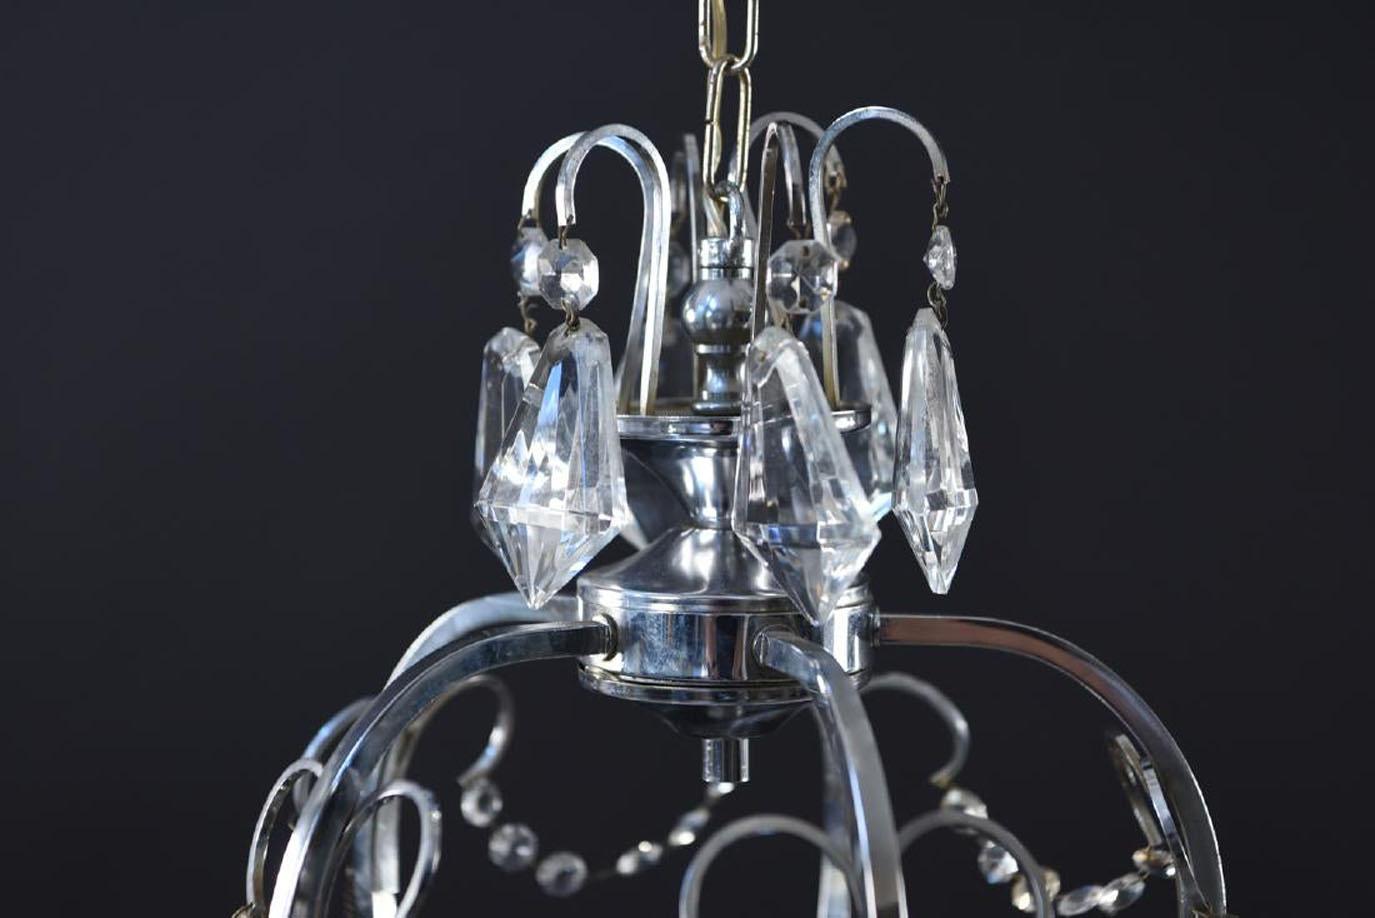 Small Postmodern chandelier with five lights with crystal swags, faceted as well as ball drops with chrome caps. Can be perfect for small entry foyer, powder room. As is condition.
OFFERING FREE SHIPPING WITHIN US CONTINENT.  PLEASE JUST ASK FOR A